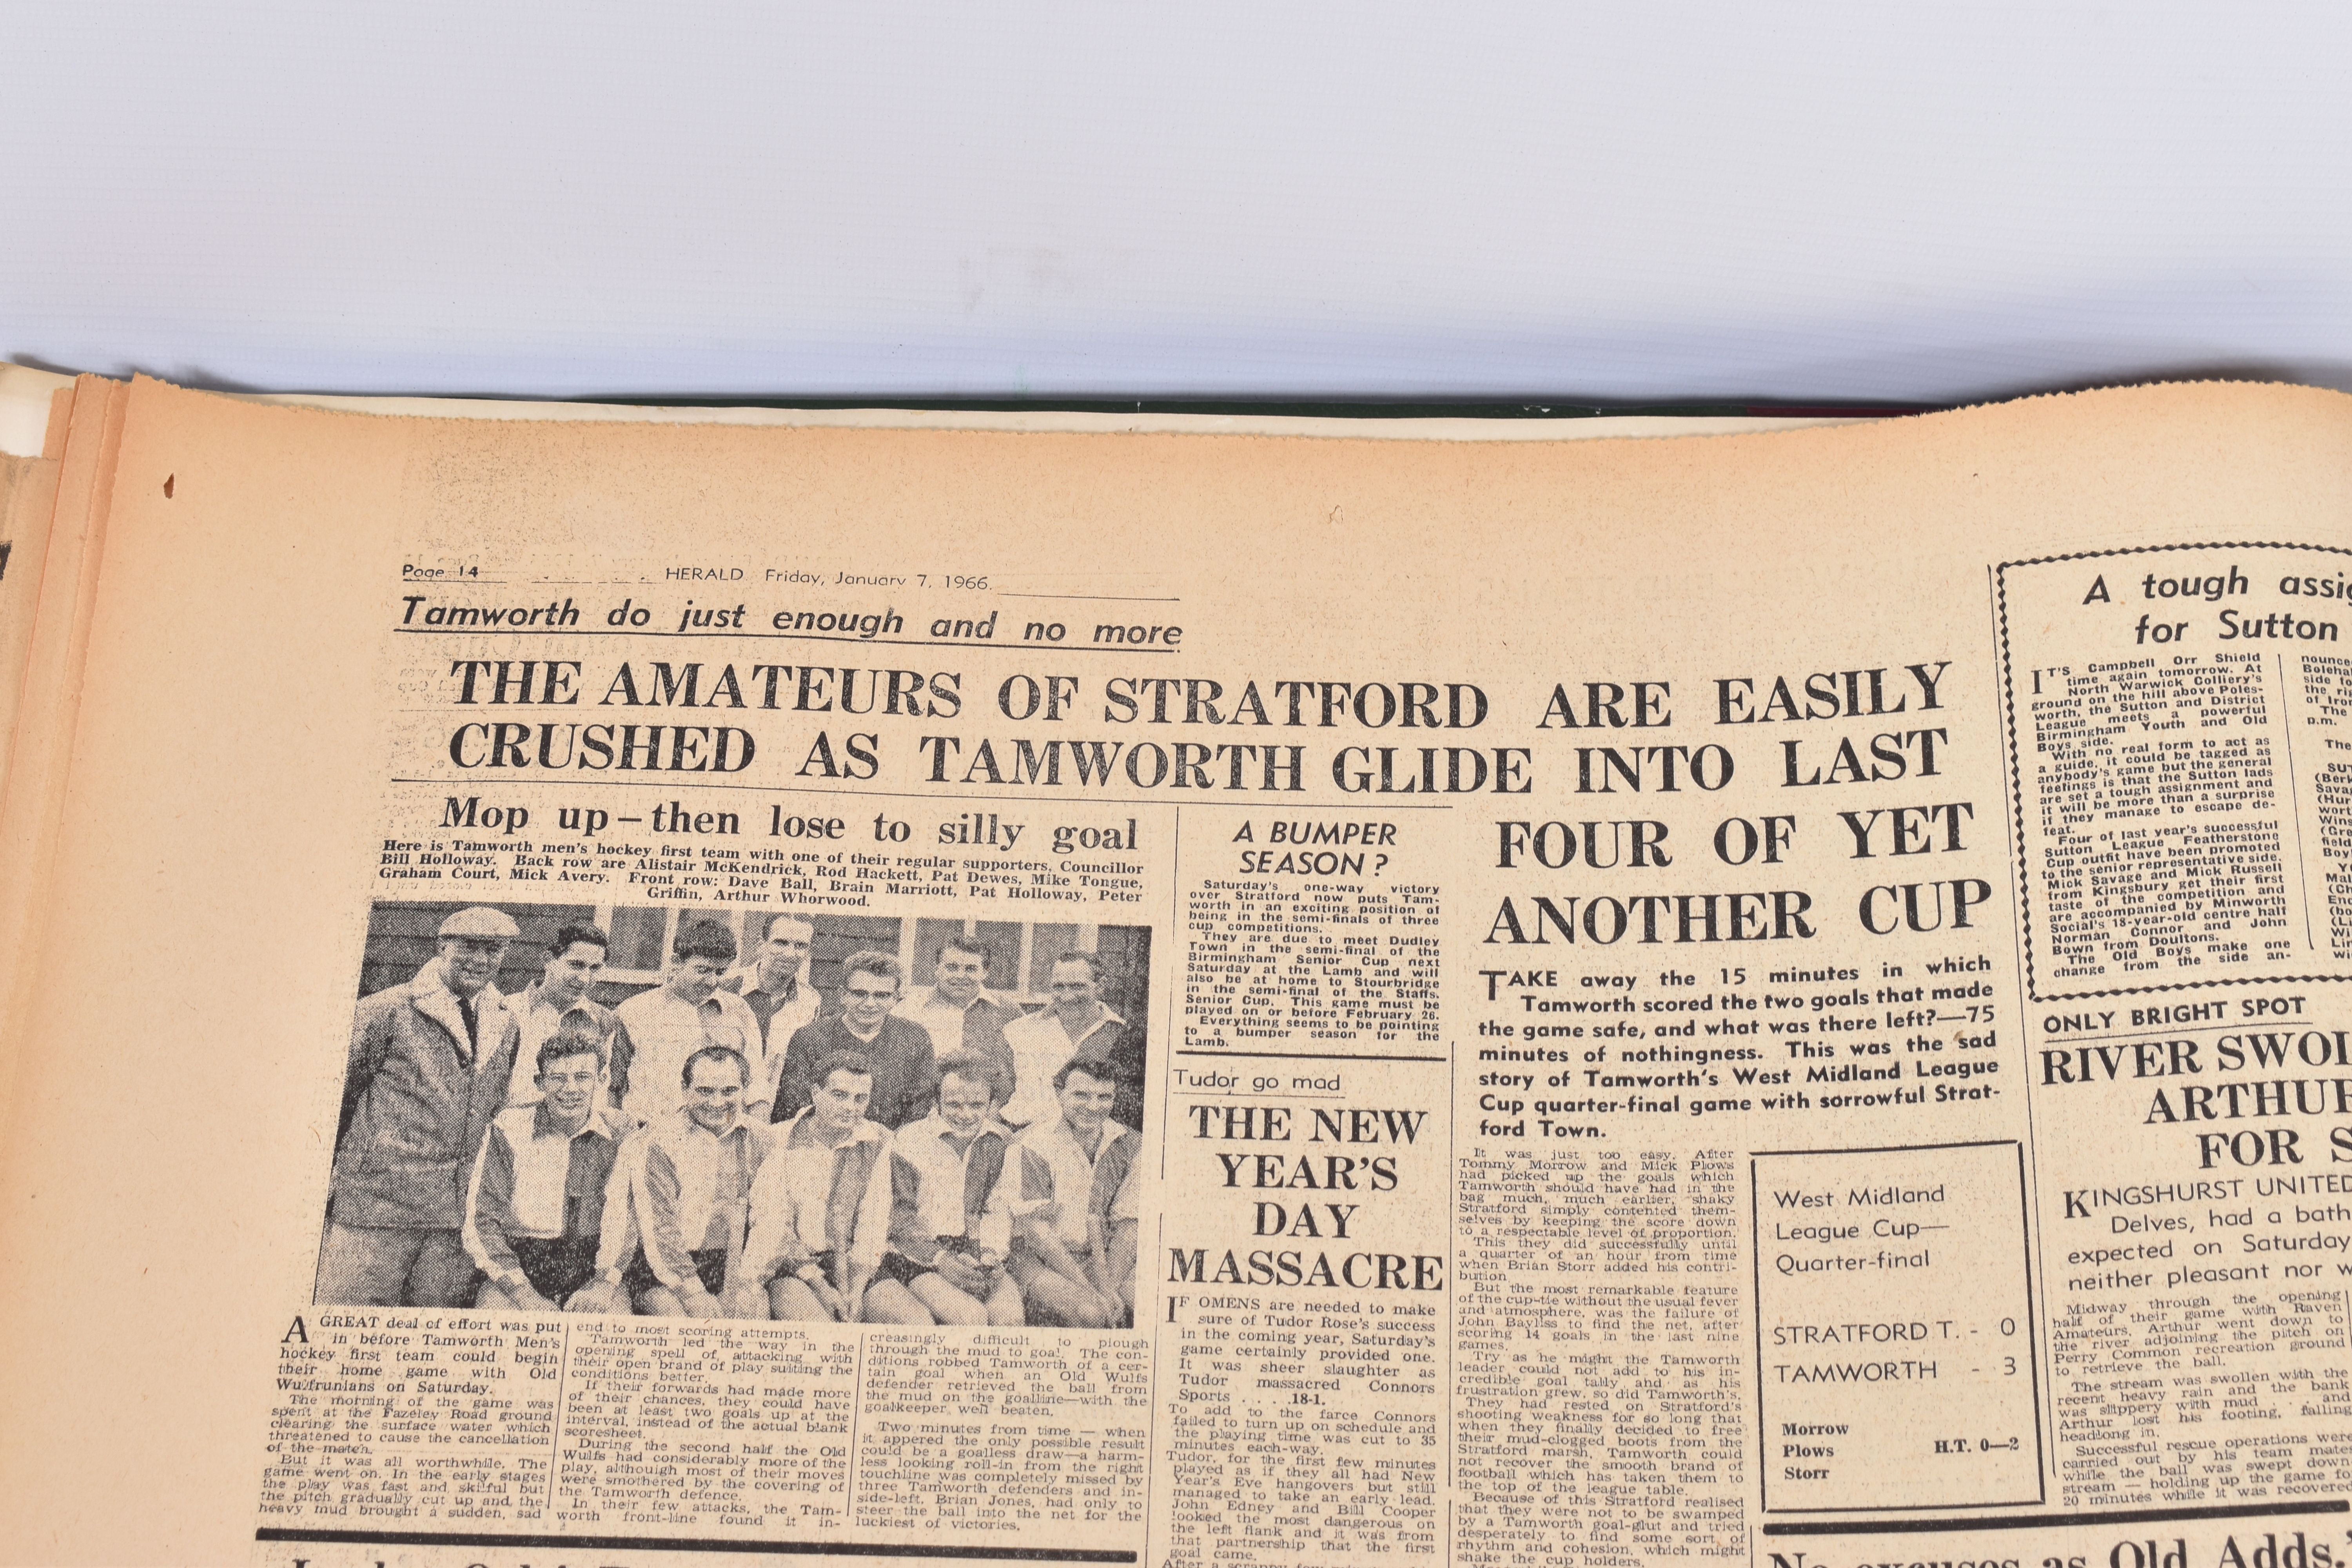 THE TAMWORTH HERALD, an Archive of the Tamworth Herald Newspaper from 1966, the newspapers are bound - Image 8 of 14